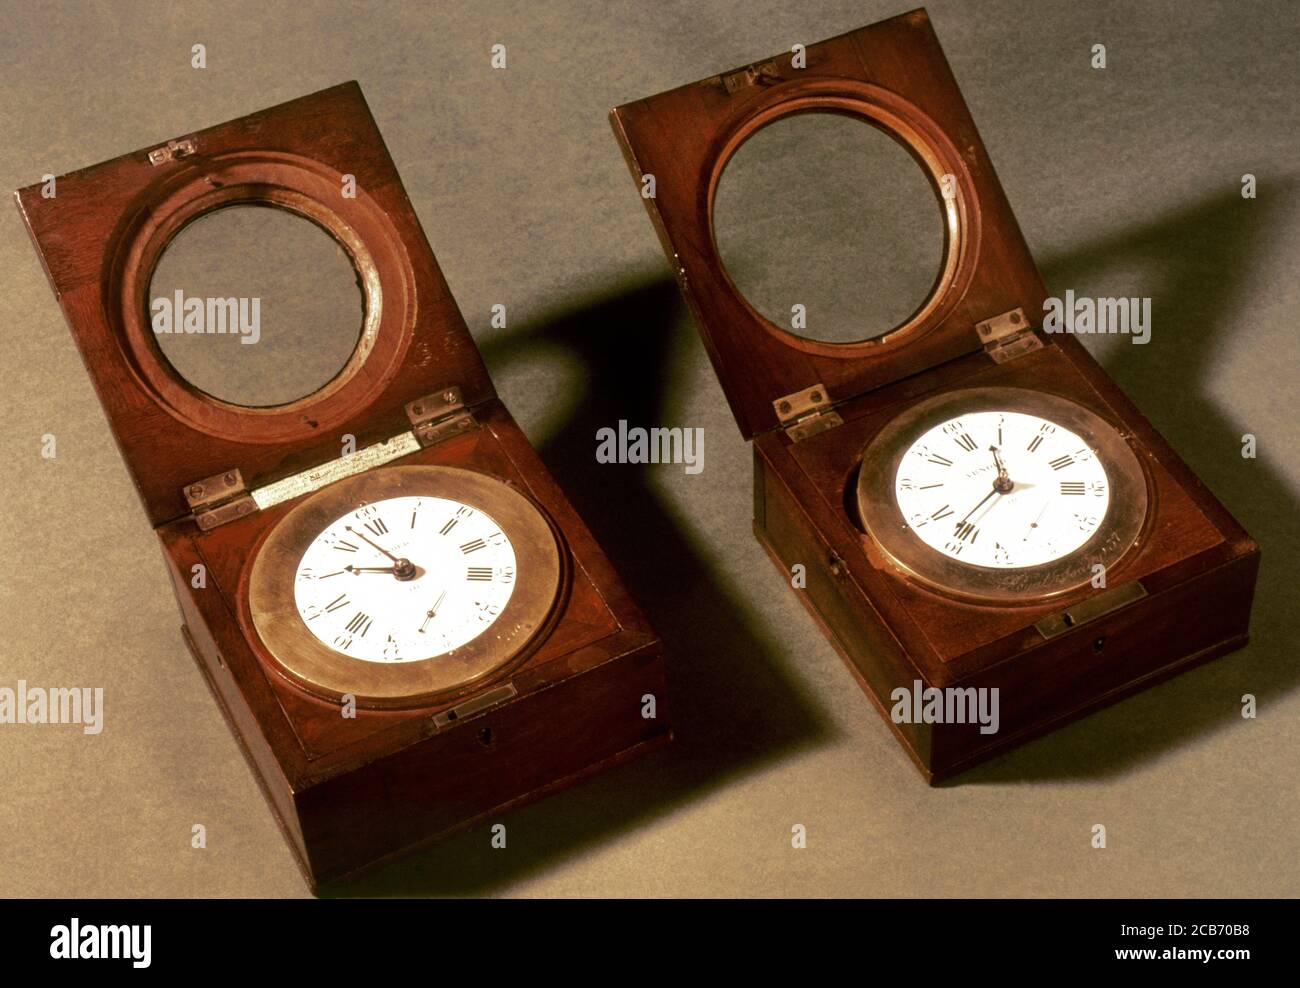 Two mahogany box chronometers, made by John Arnold (1736-1799) for Captain James Cook's second Pacific voyage in 1772. Date, 1771. Stock Photo